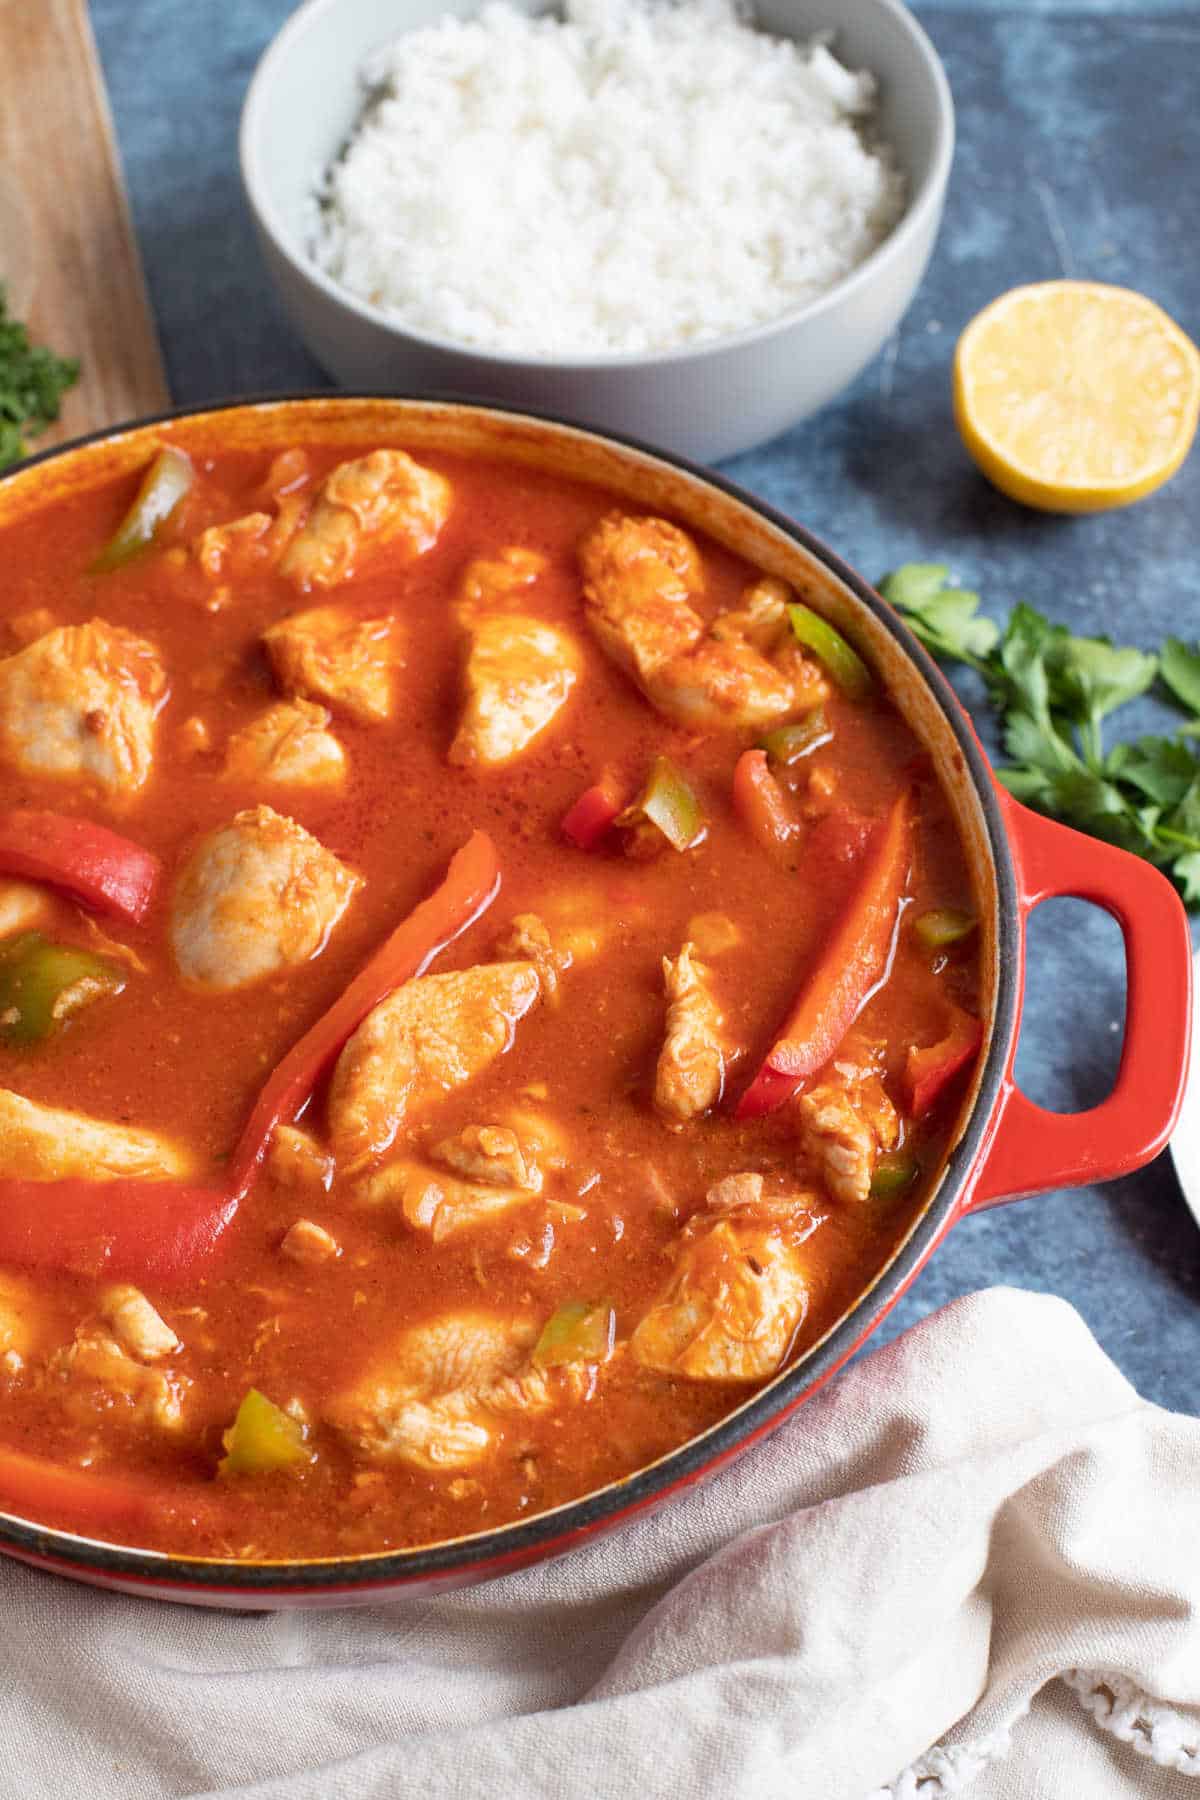 Chicken goulash with peppers.